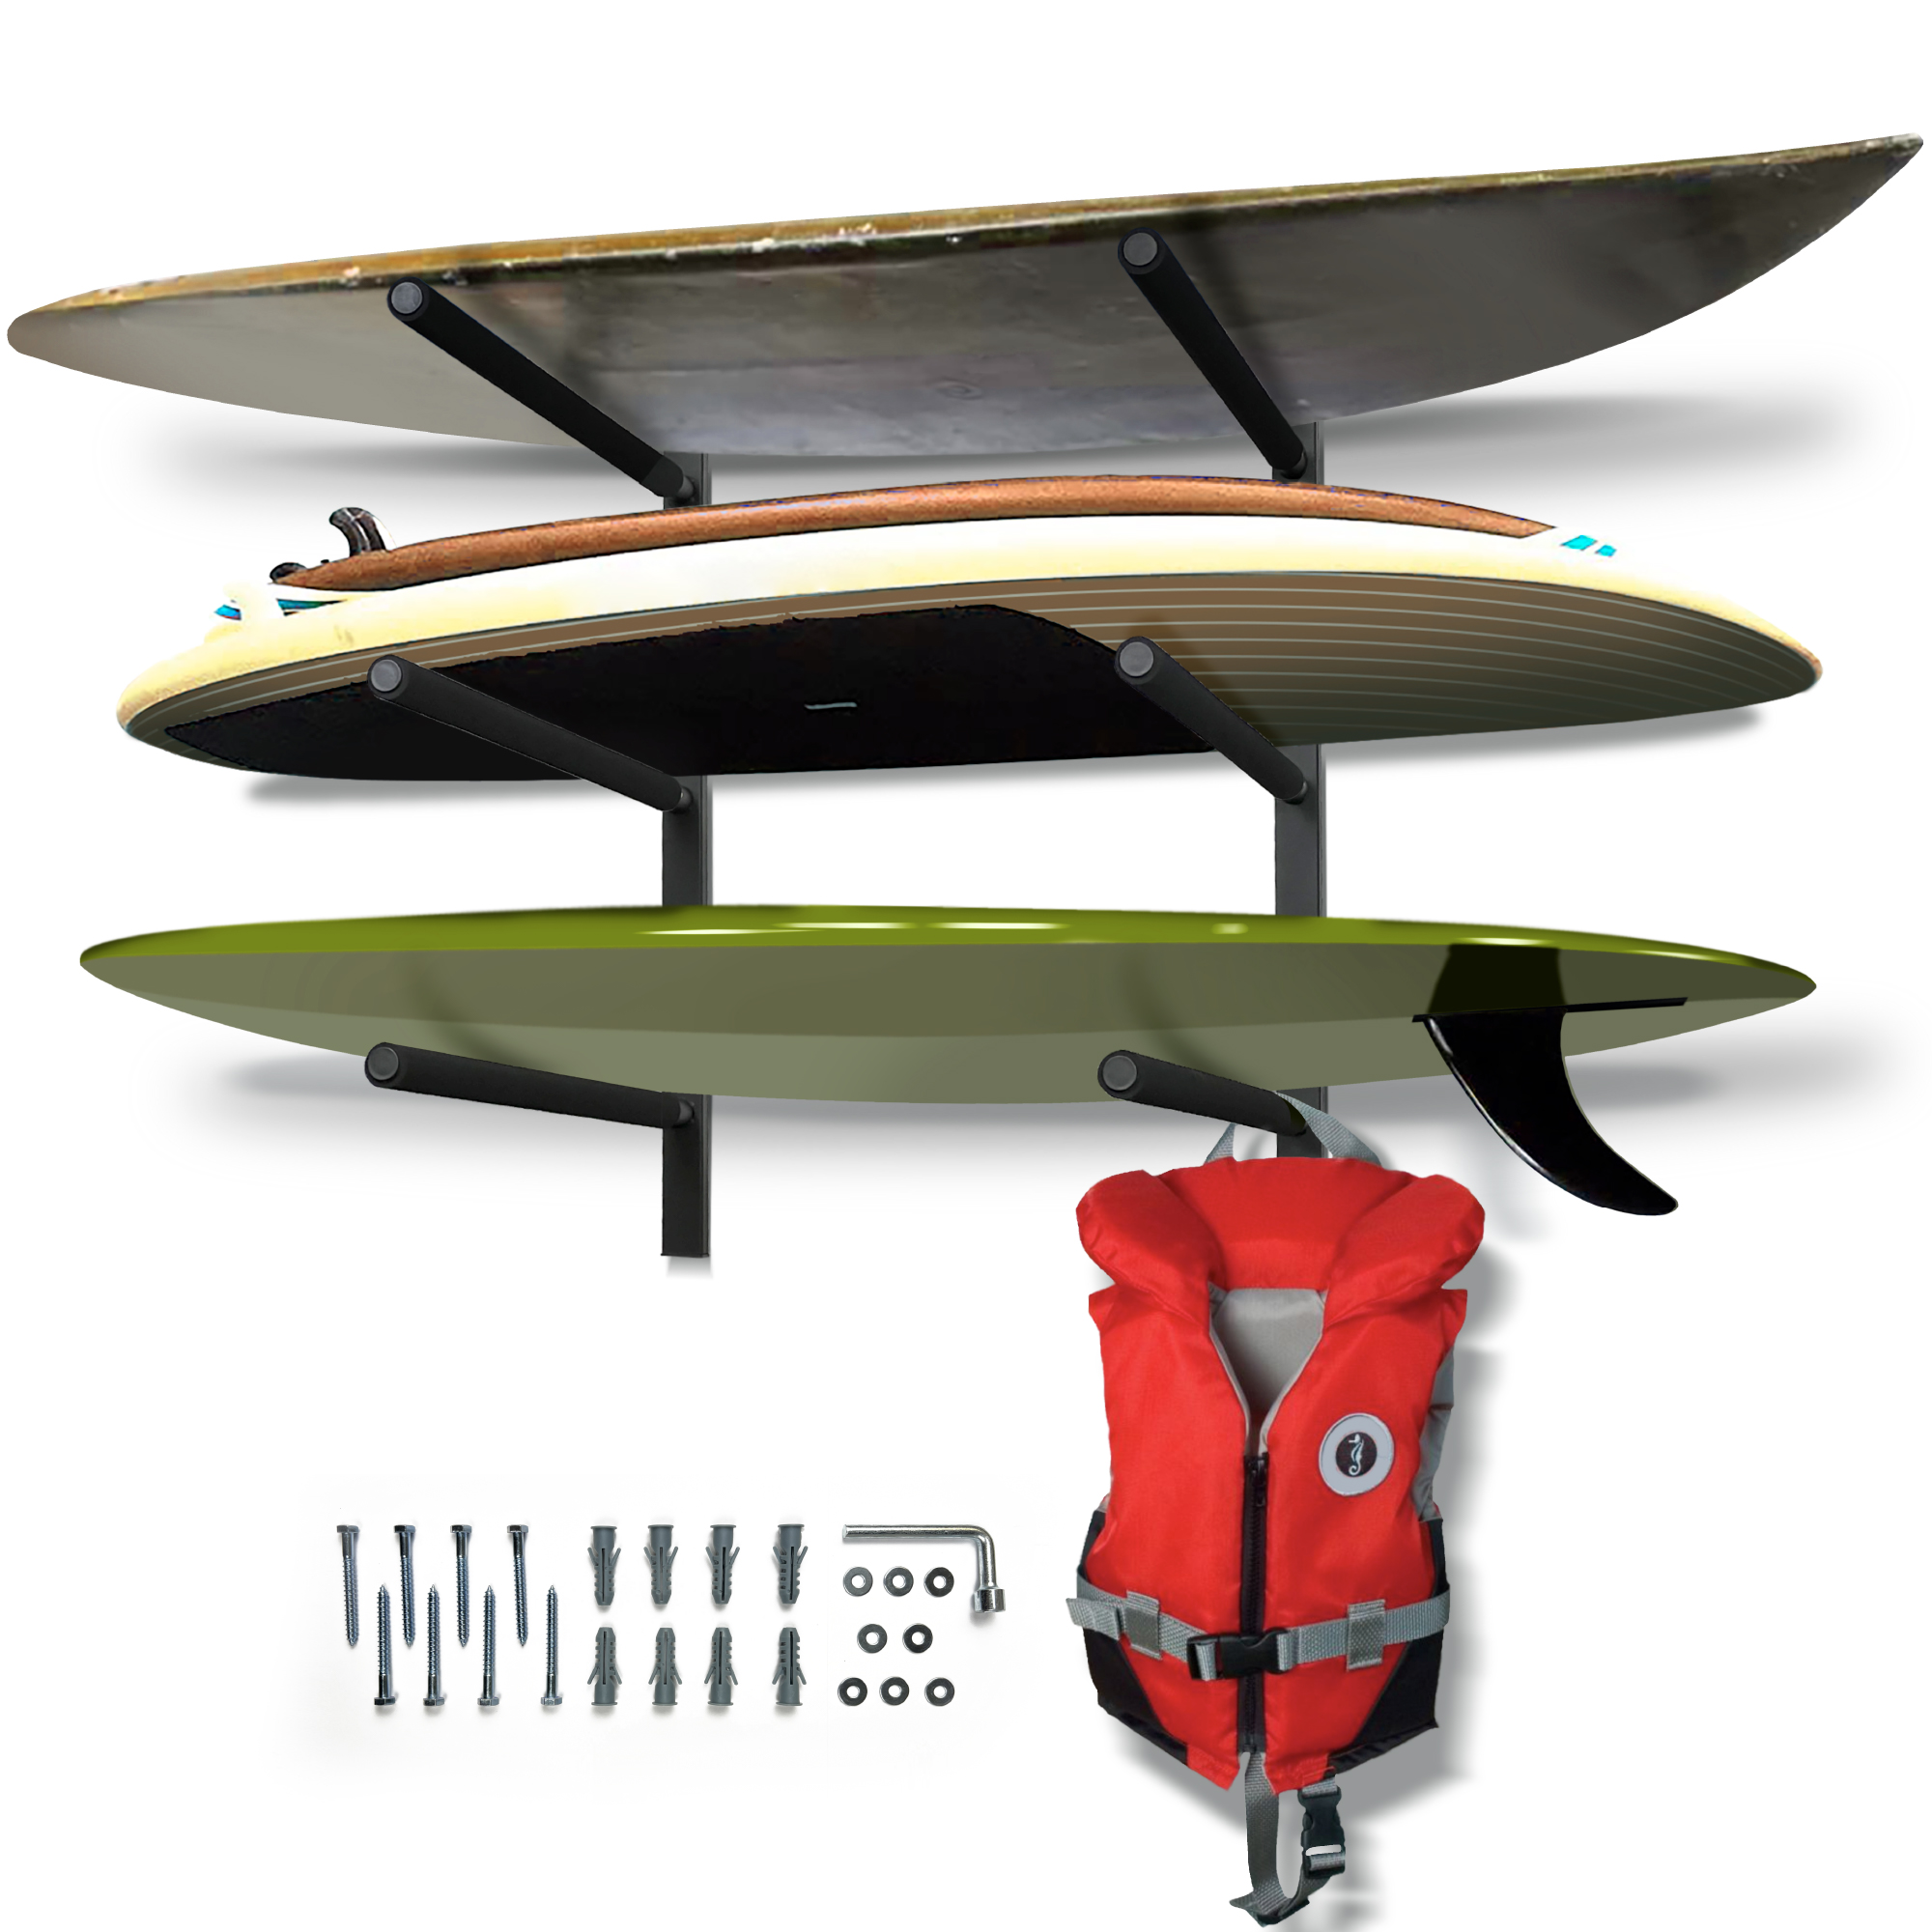 Venom Paddle Board Rack Wall Mounted 3 SUP Storage Rack, 3 Level Surfboard Rack, Kayak Rack, Snowboard Wall Mount,  Dock Storage, Garage Storage, Ski Storage, Canoe Accessories, Holds Up To 240lbs - image 1 of 9